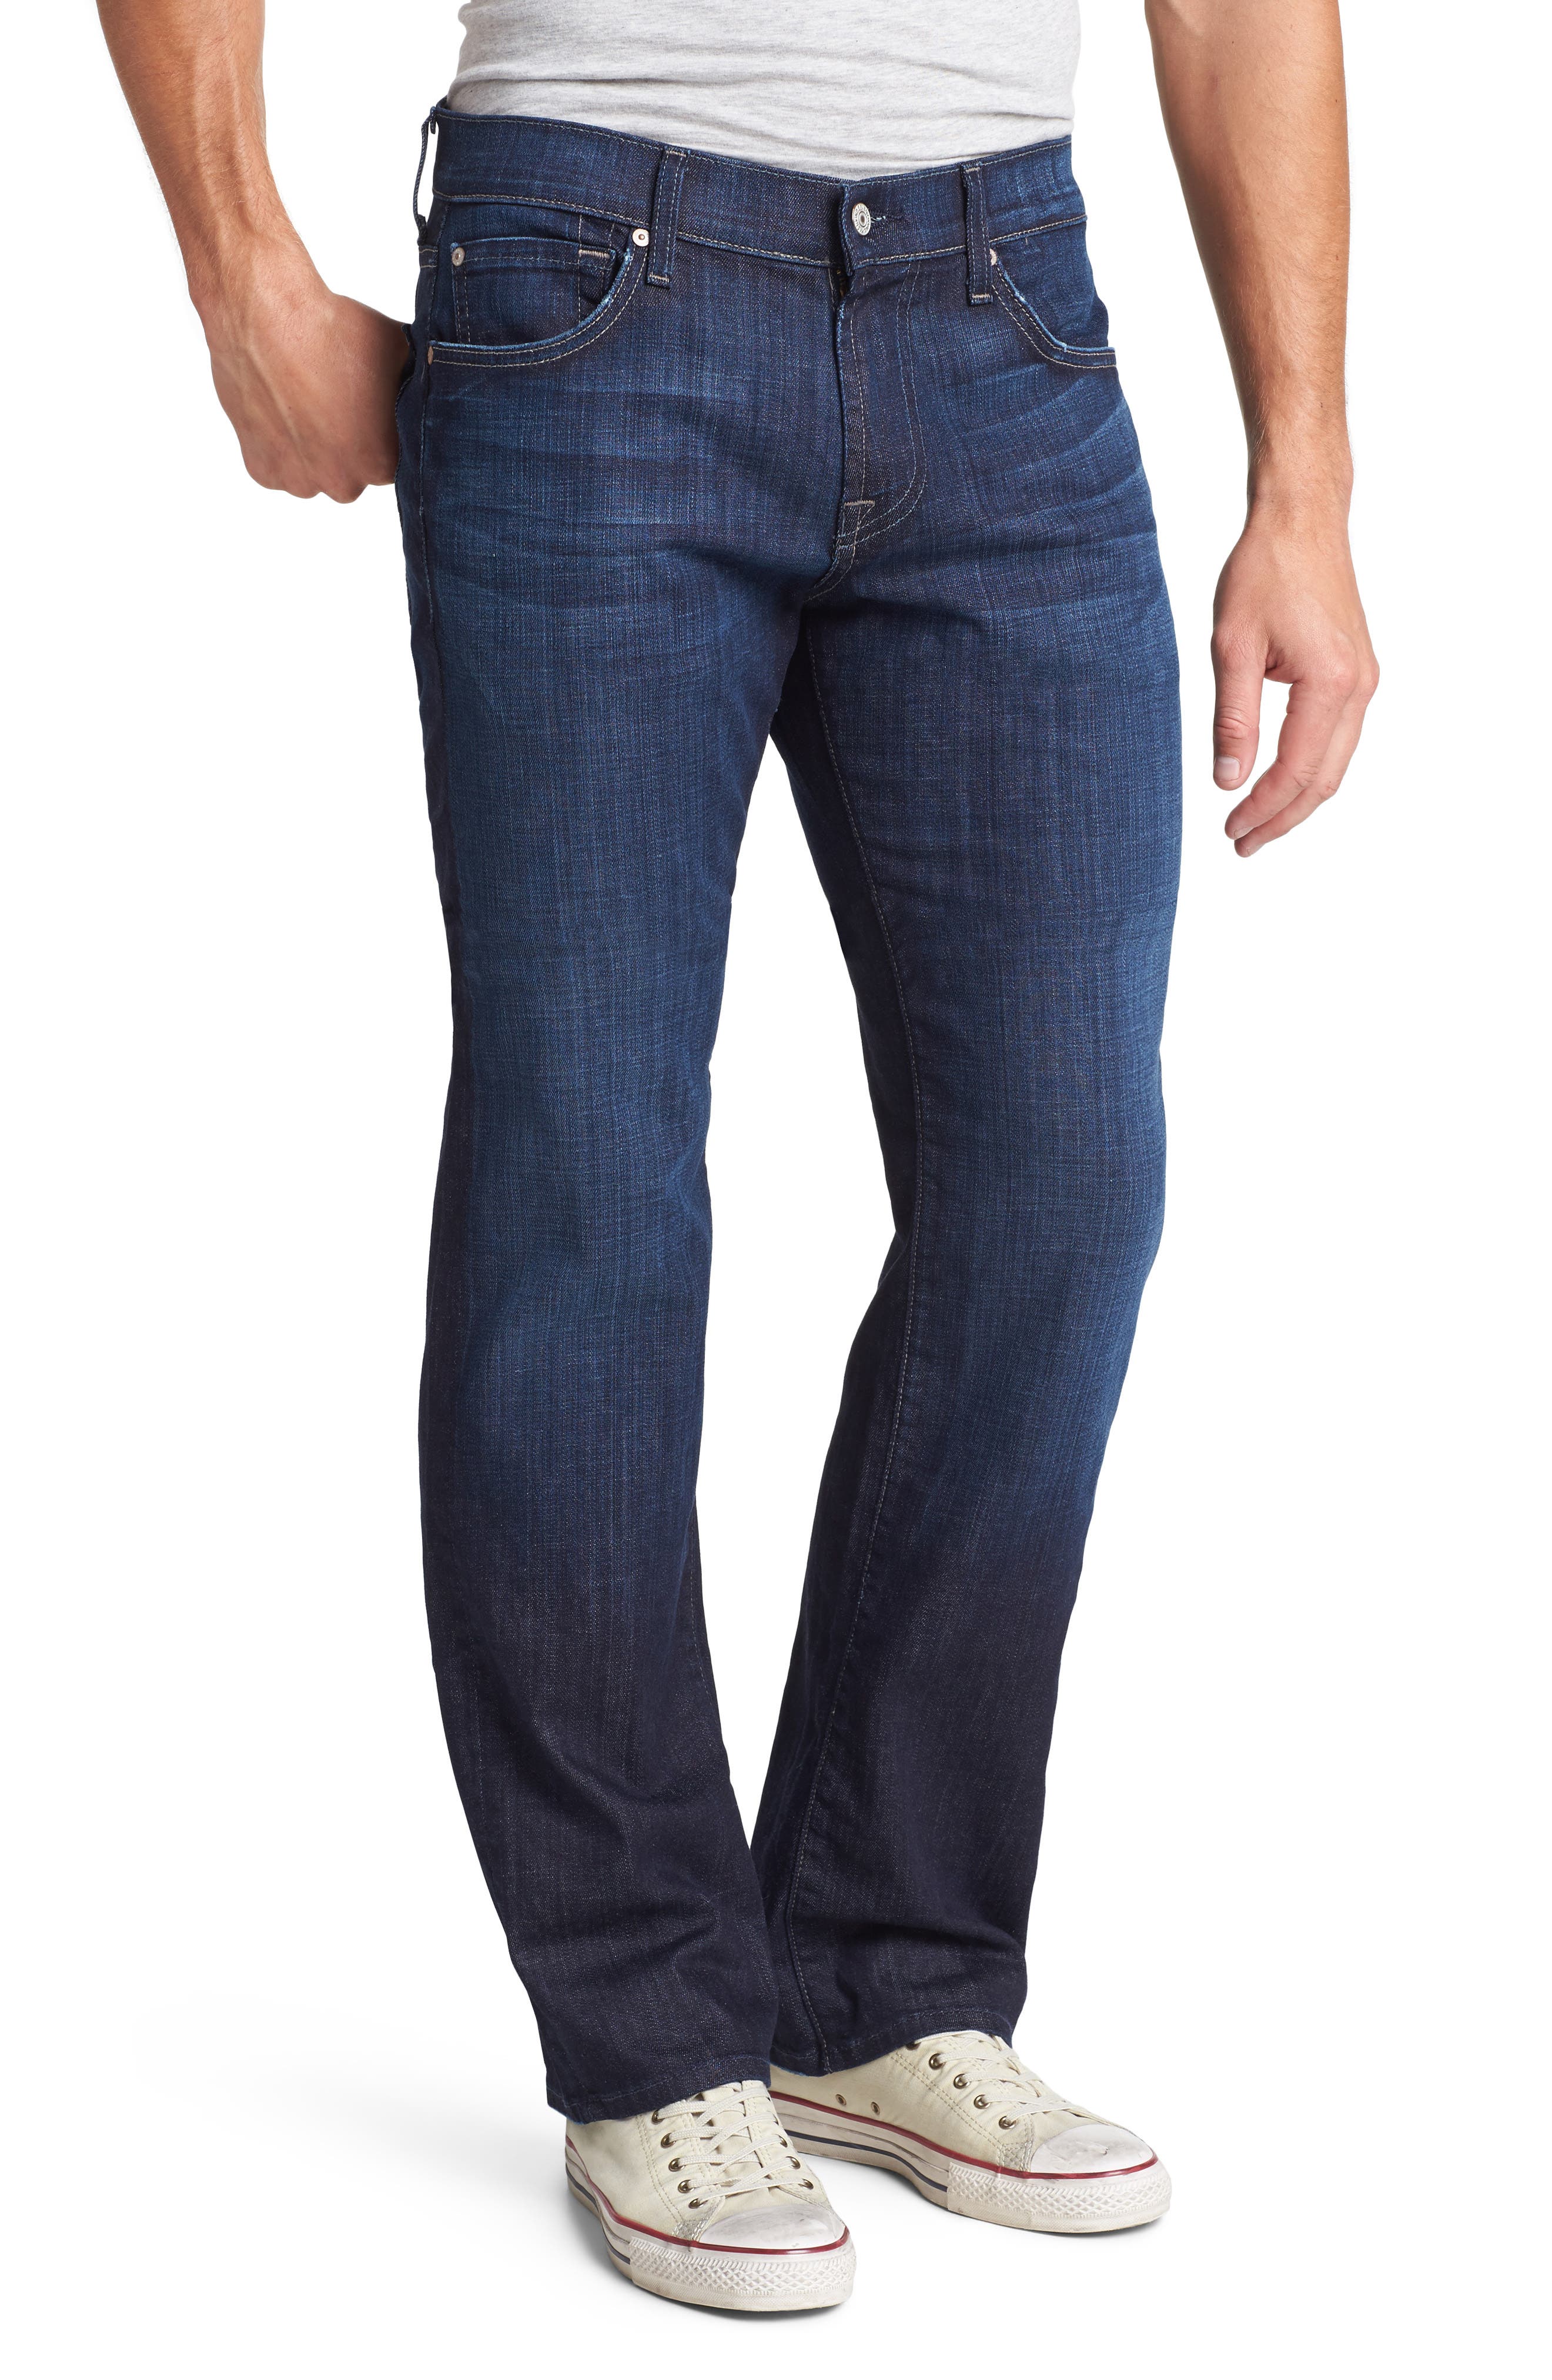 Mens Clothing Jeans Straight-leg jeans 7 For All Mankind Denim Low-rise Slim-cut Jeans in Blue for Men 